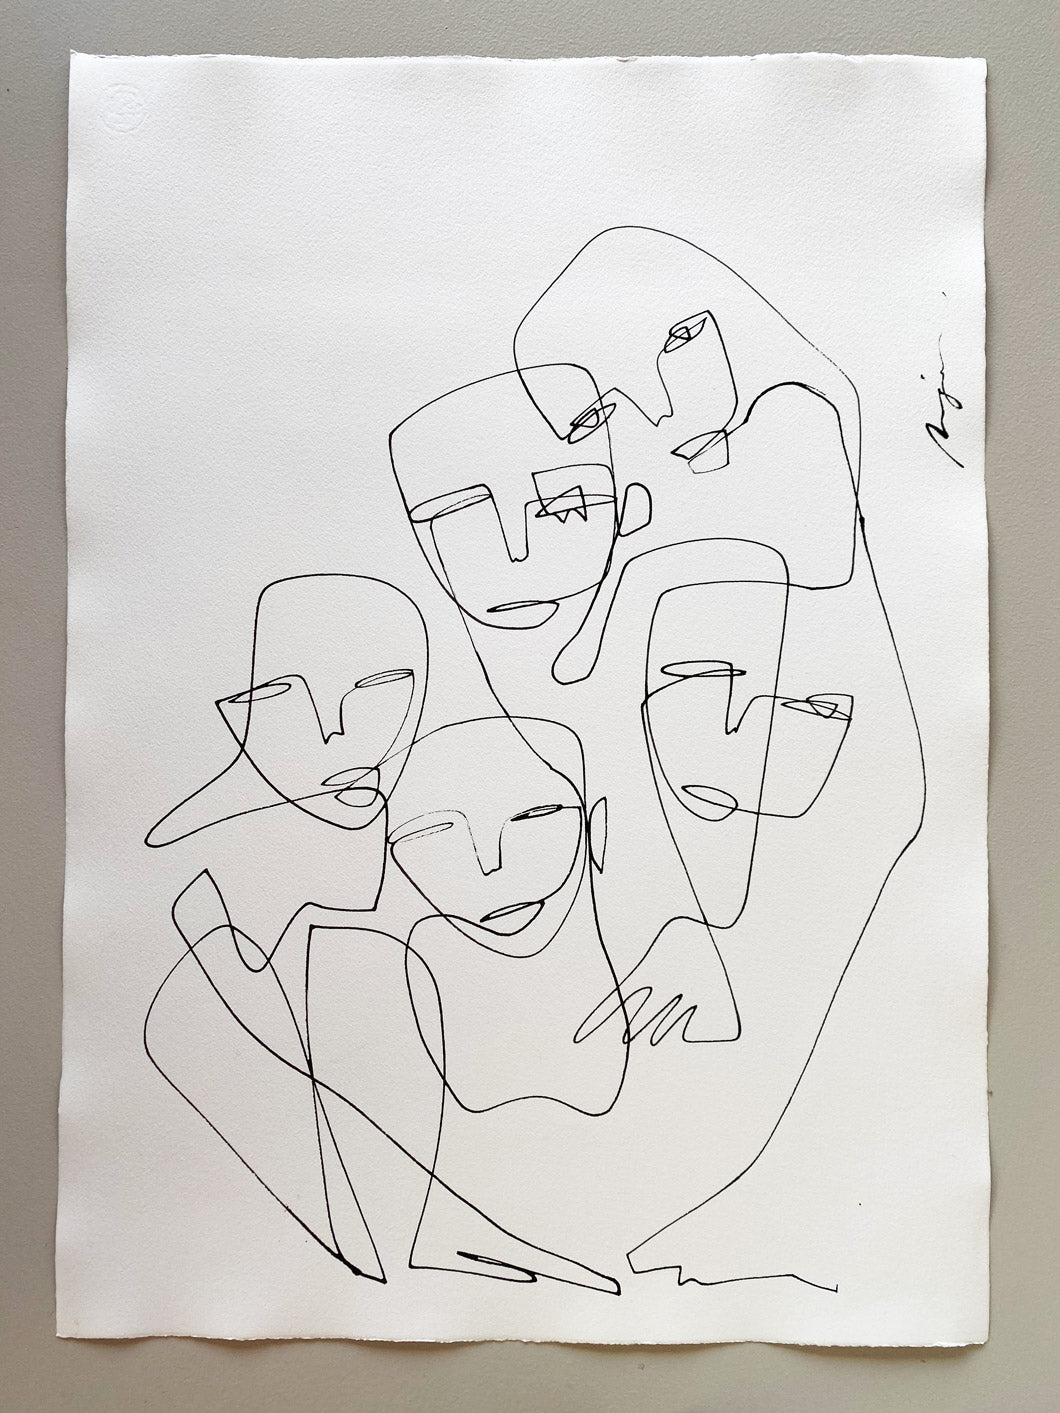 The Inseparable Five I One line I Medium